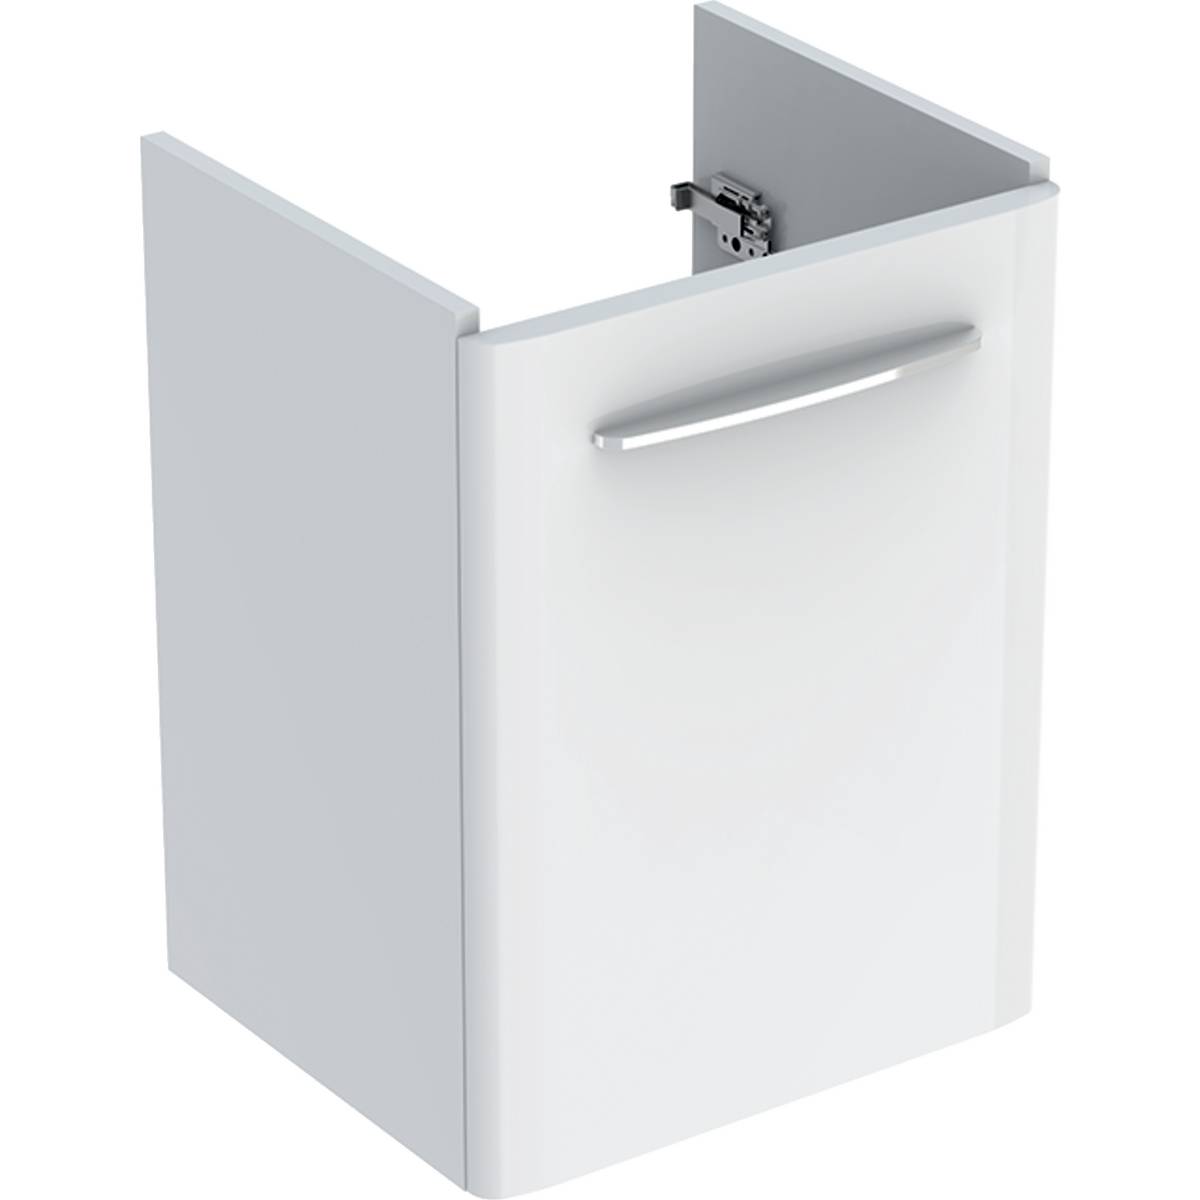 Selnova Square Cabinet for Handrinse Basin, with One Door and Service Space